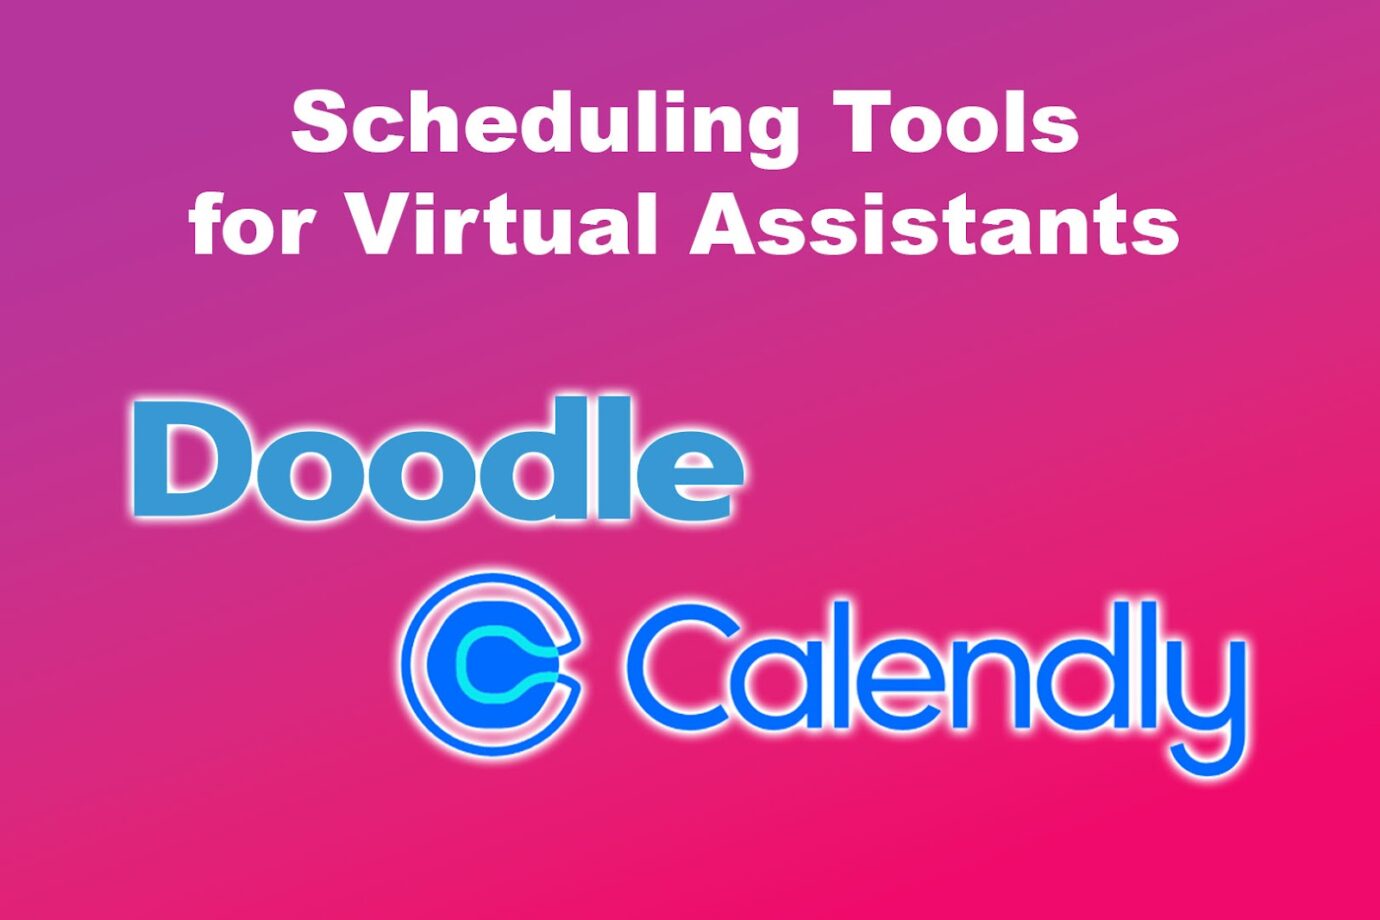 Scheduling Tools for Virtual Assistants